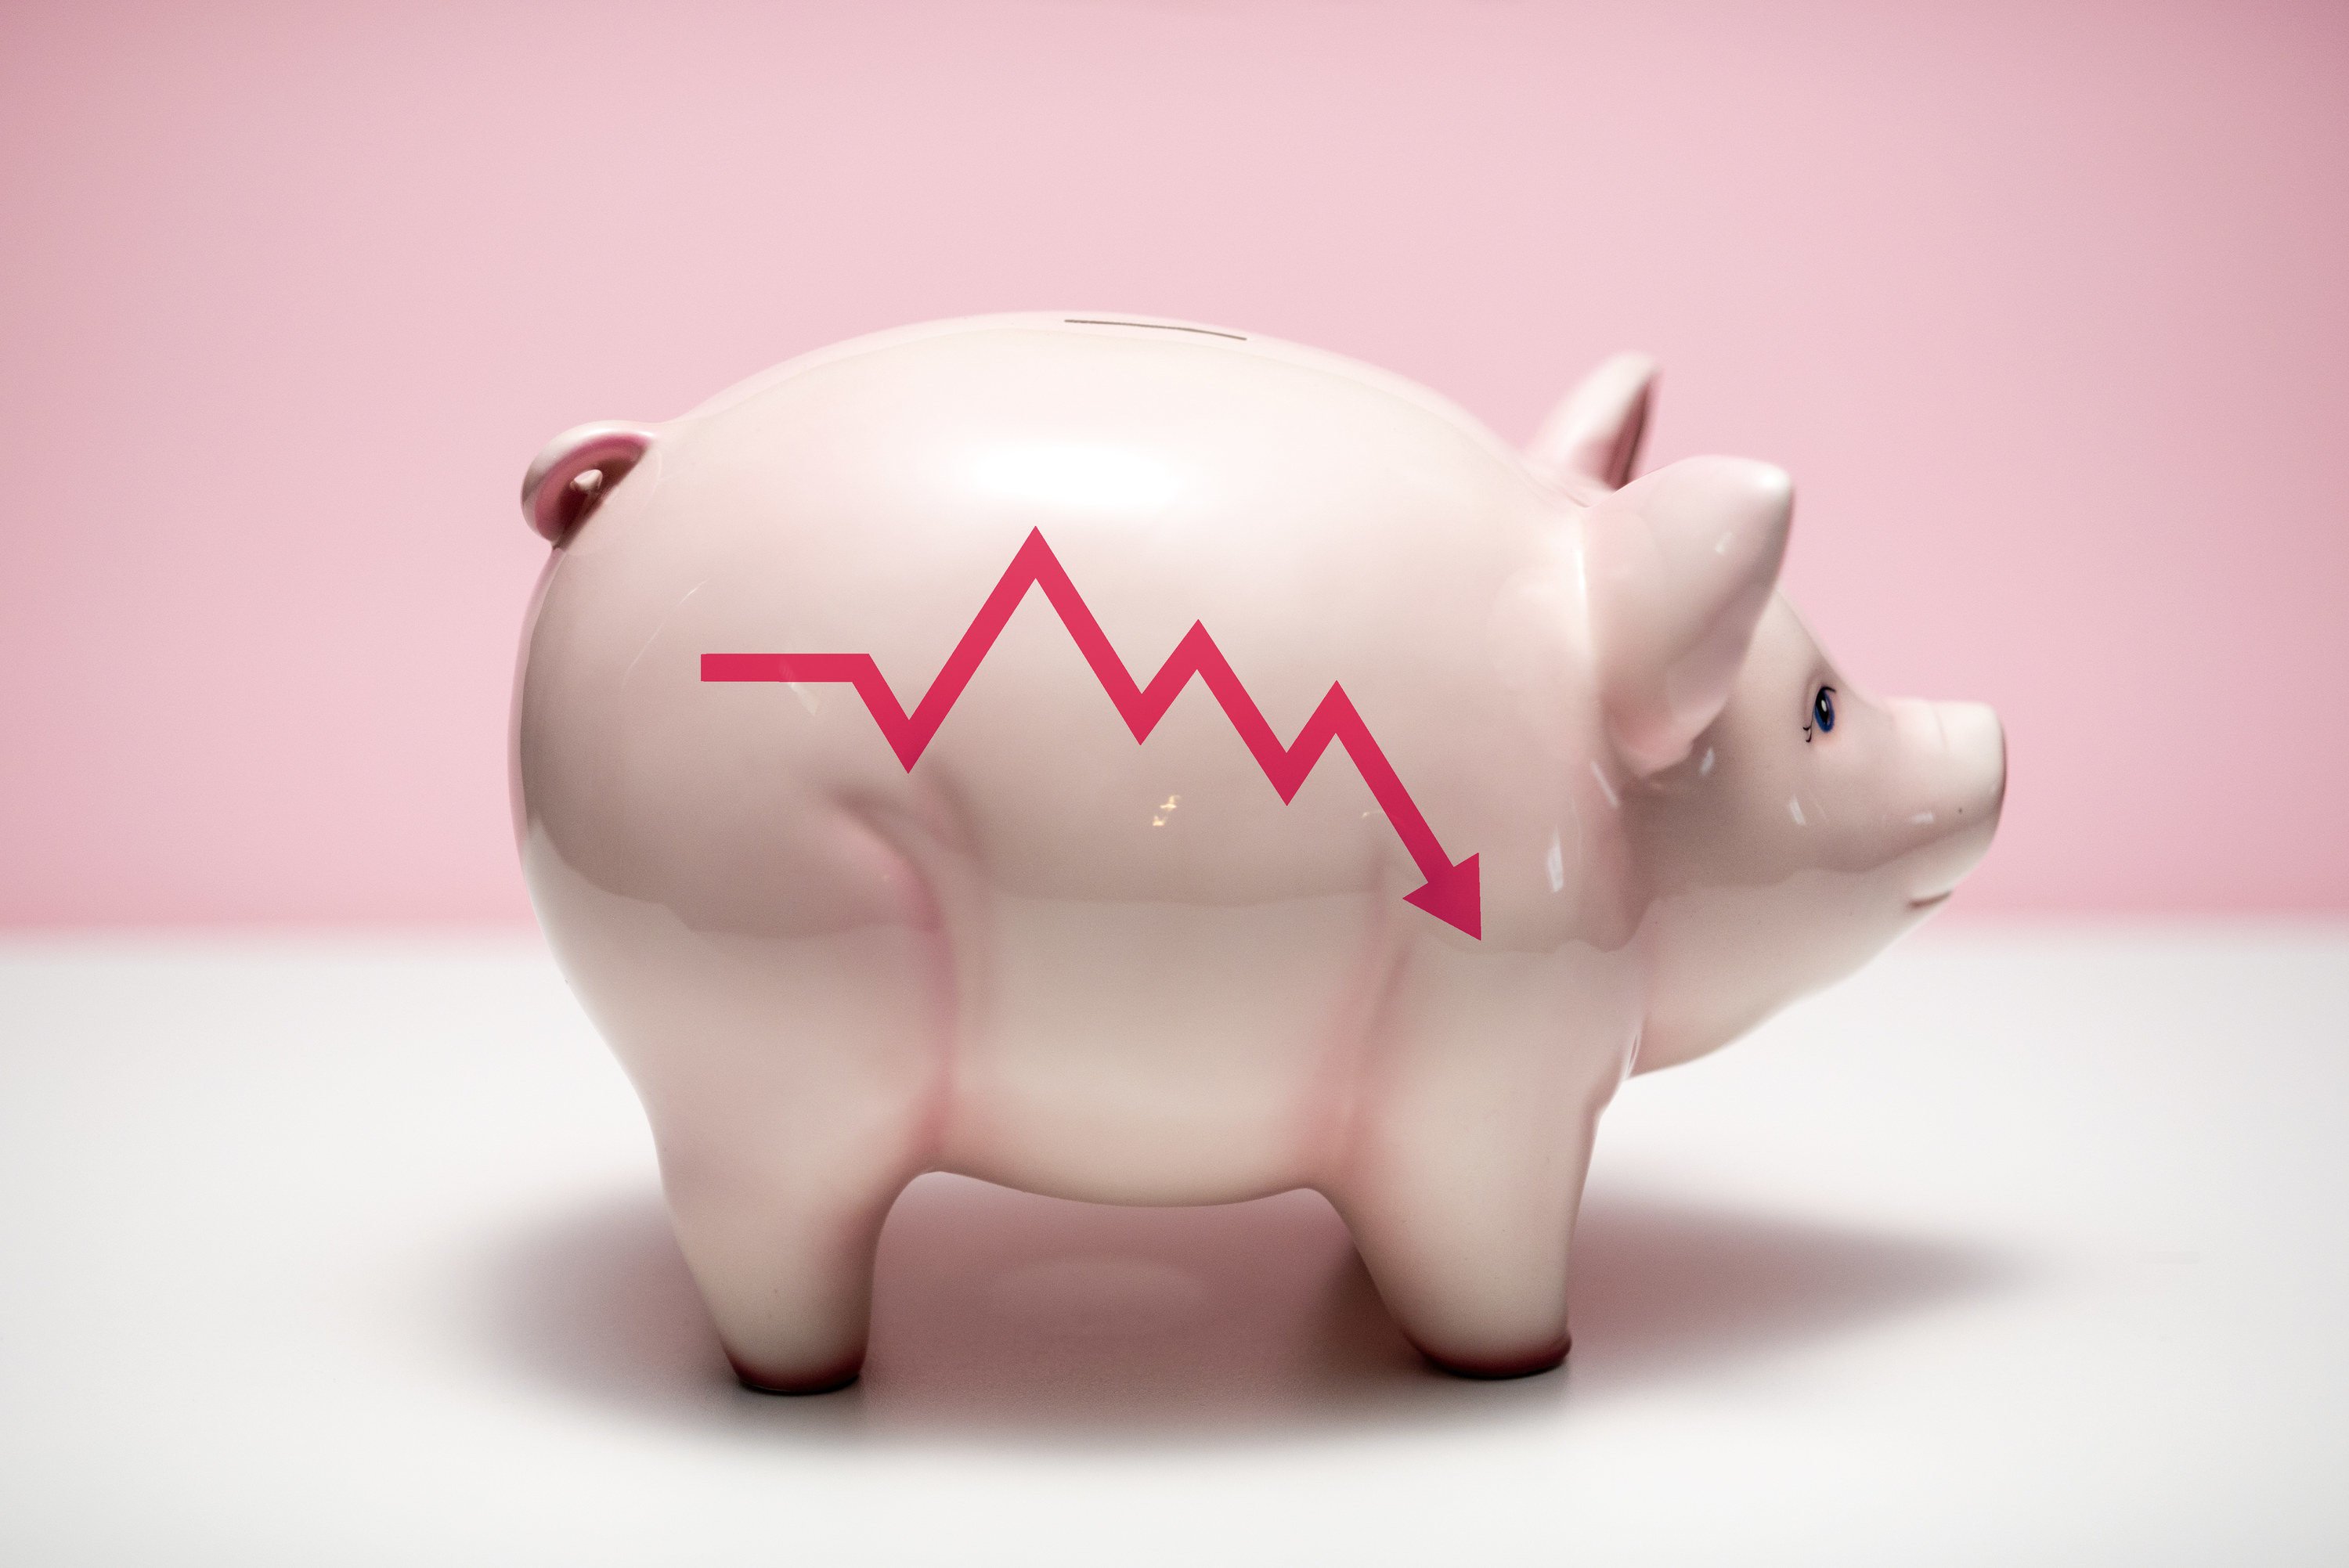 Piggy bank with a downward stock trend arrow on it